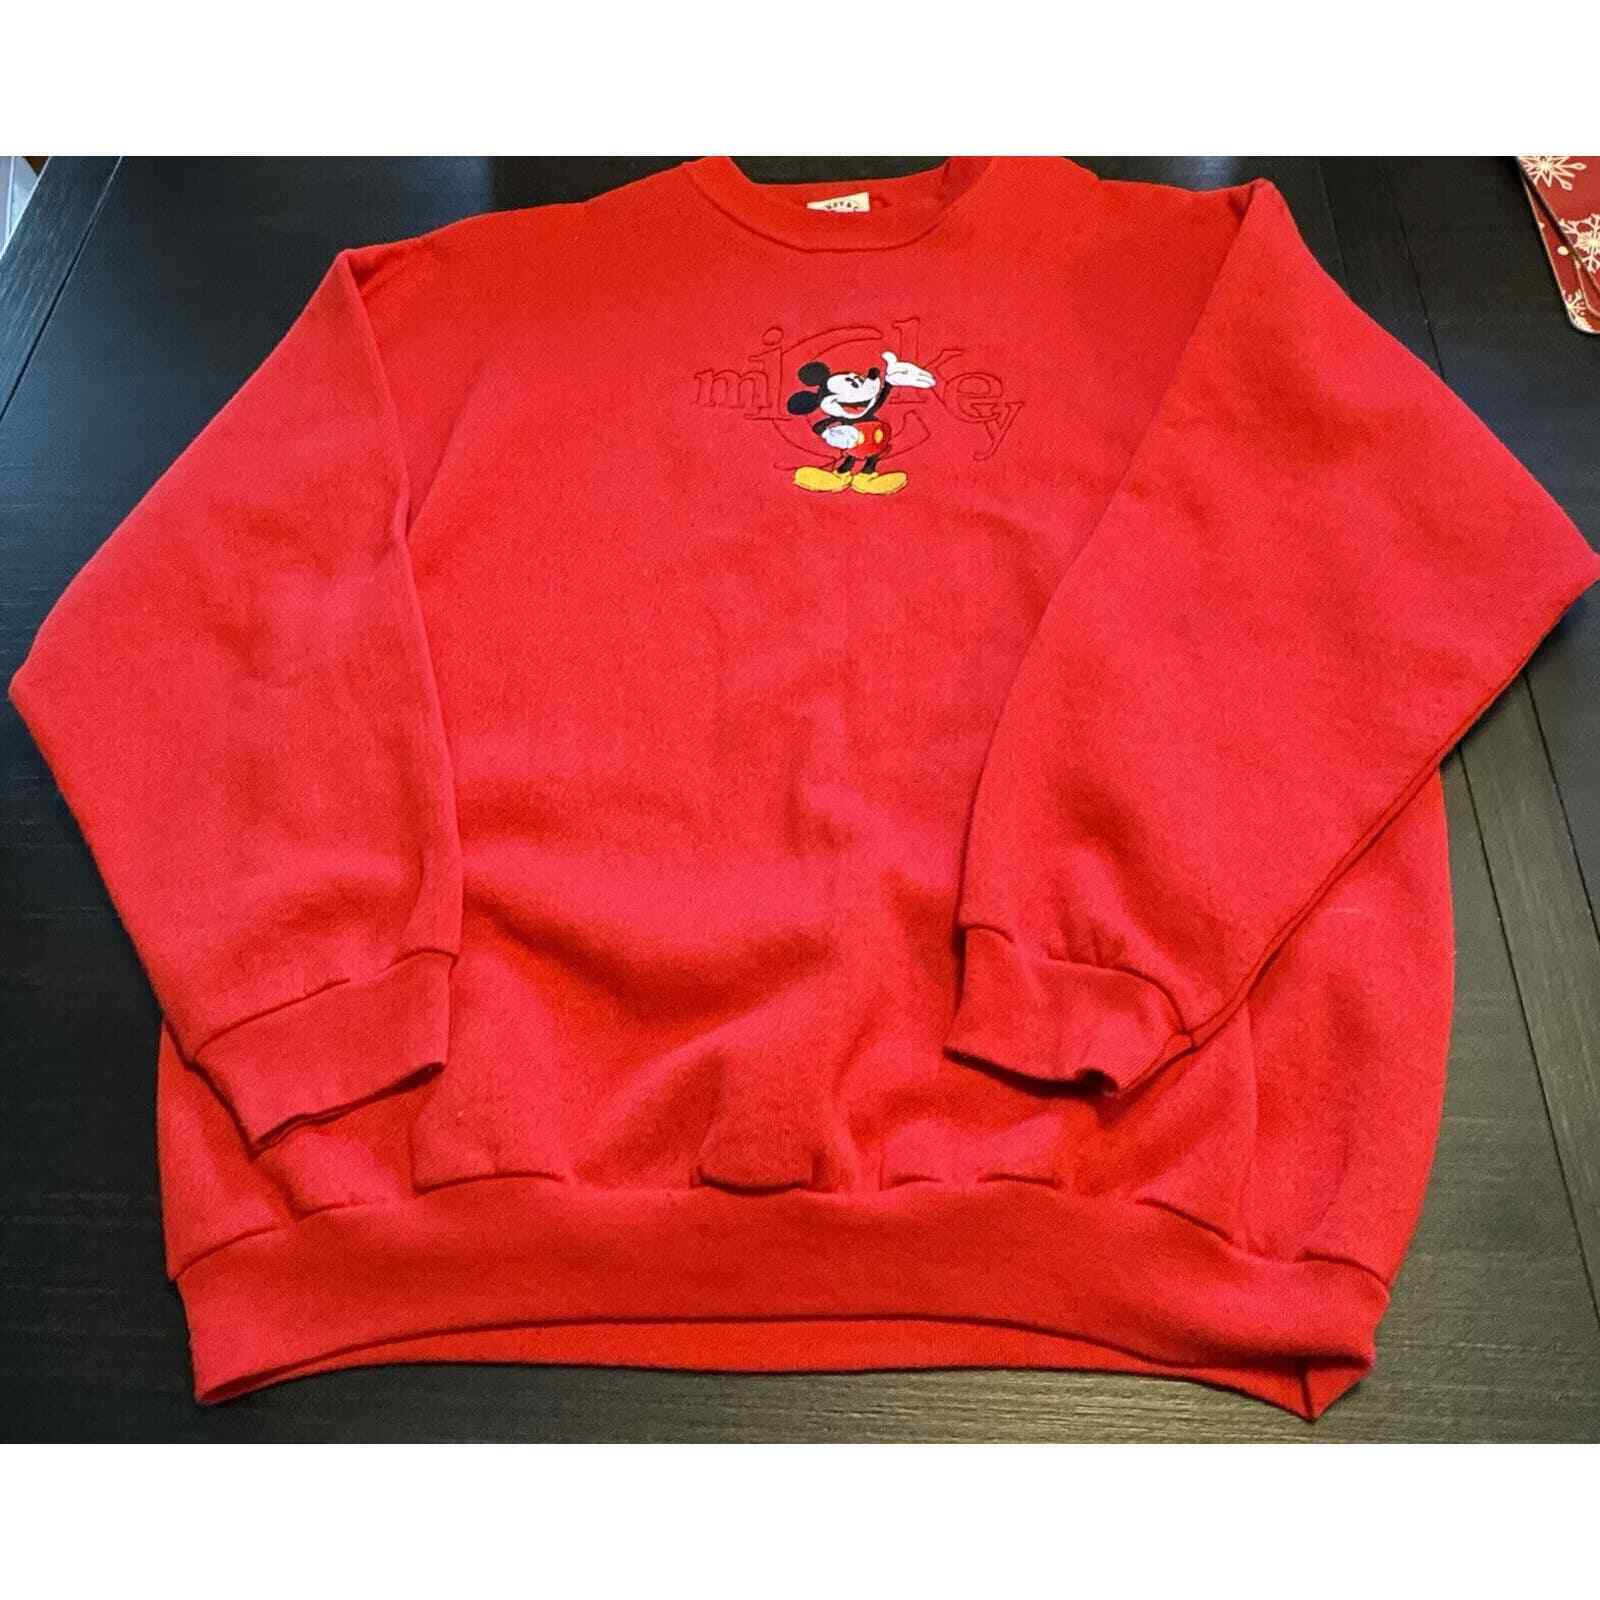 Mickey & Co Vintage 90s Made In USA Sweatshirt Unisex Xl see pics and desc